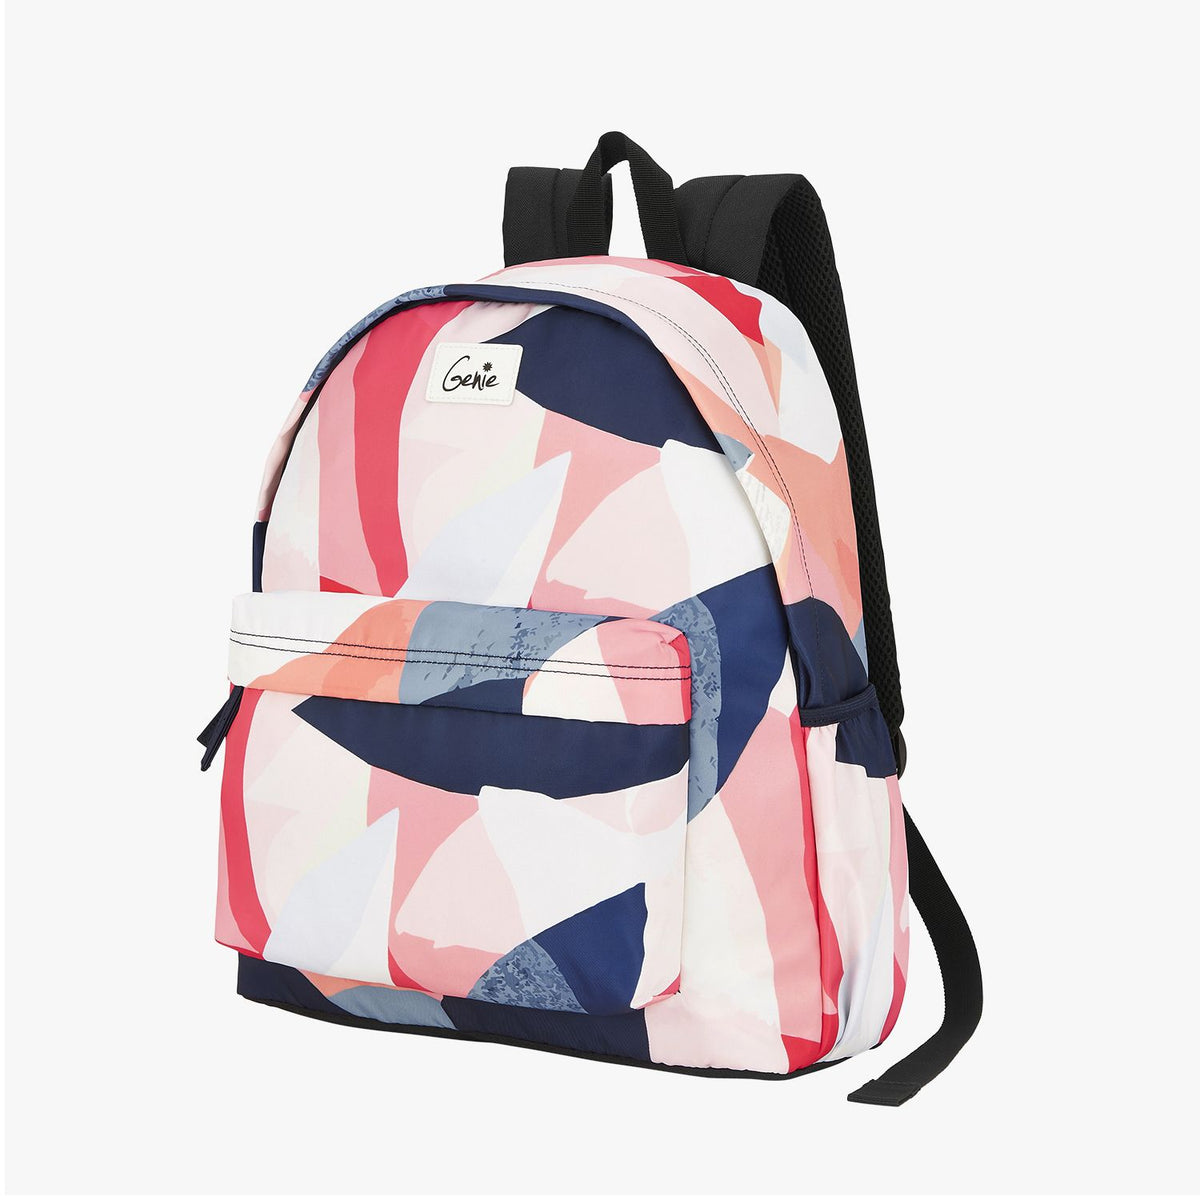 Waterproof Small Laptop Backpack Womens For Students, Travel, Gym, And  Outdoor Sports LL 8101 From Navigator_seller, $25.63 | DHgate.Com